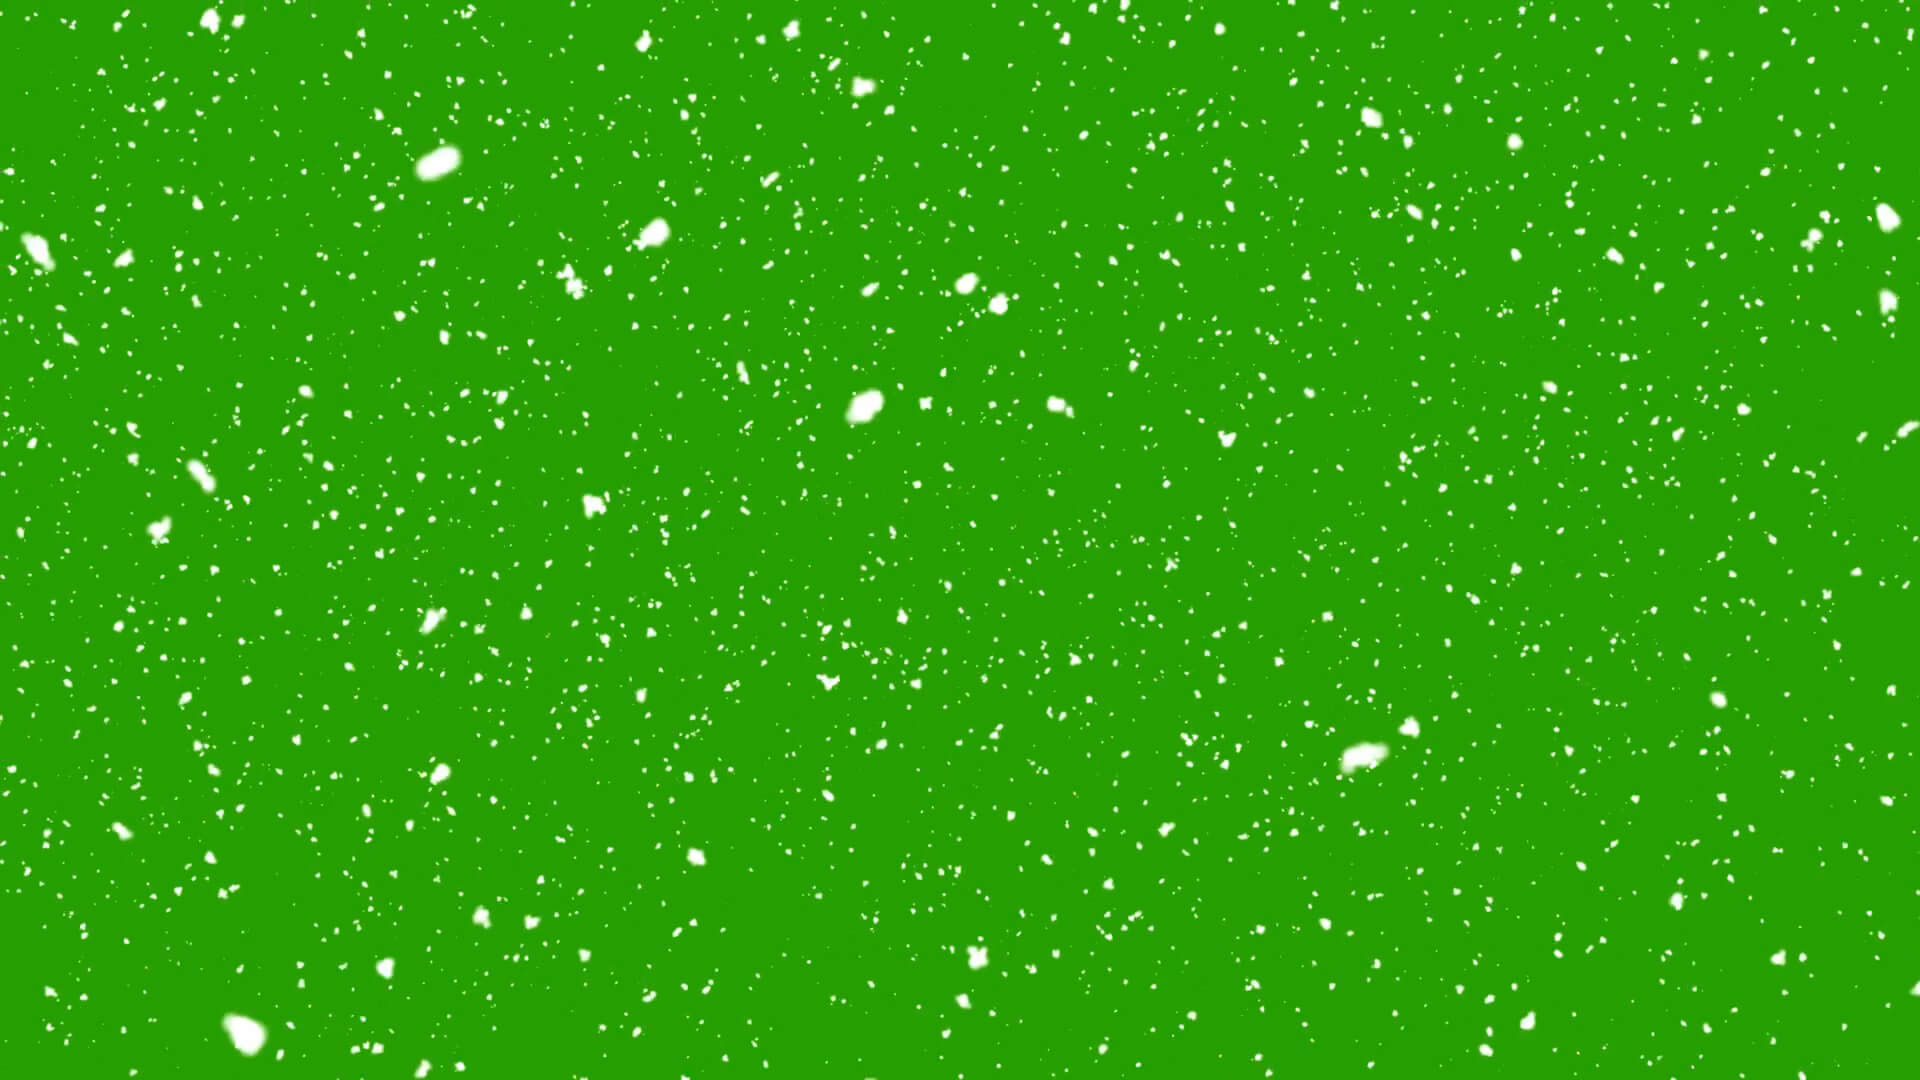 Free snow overlay 301048193 from Adobe Stock.